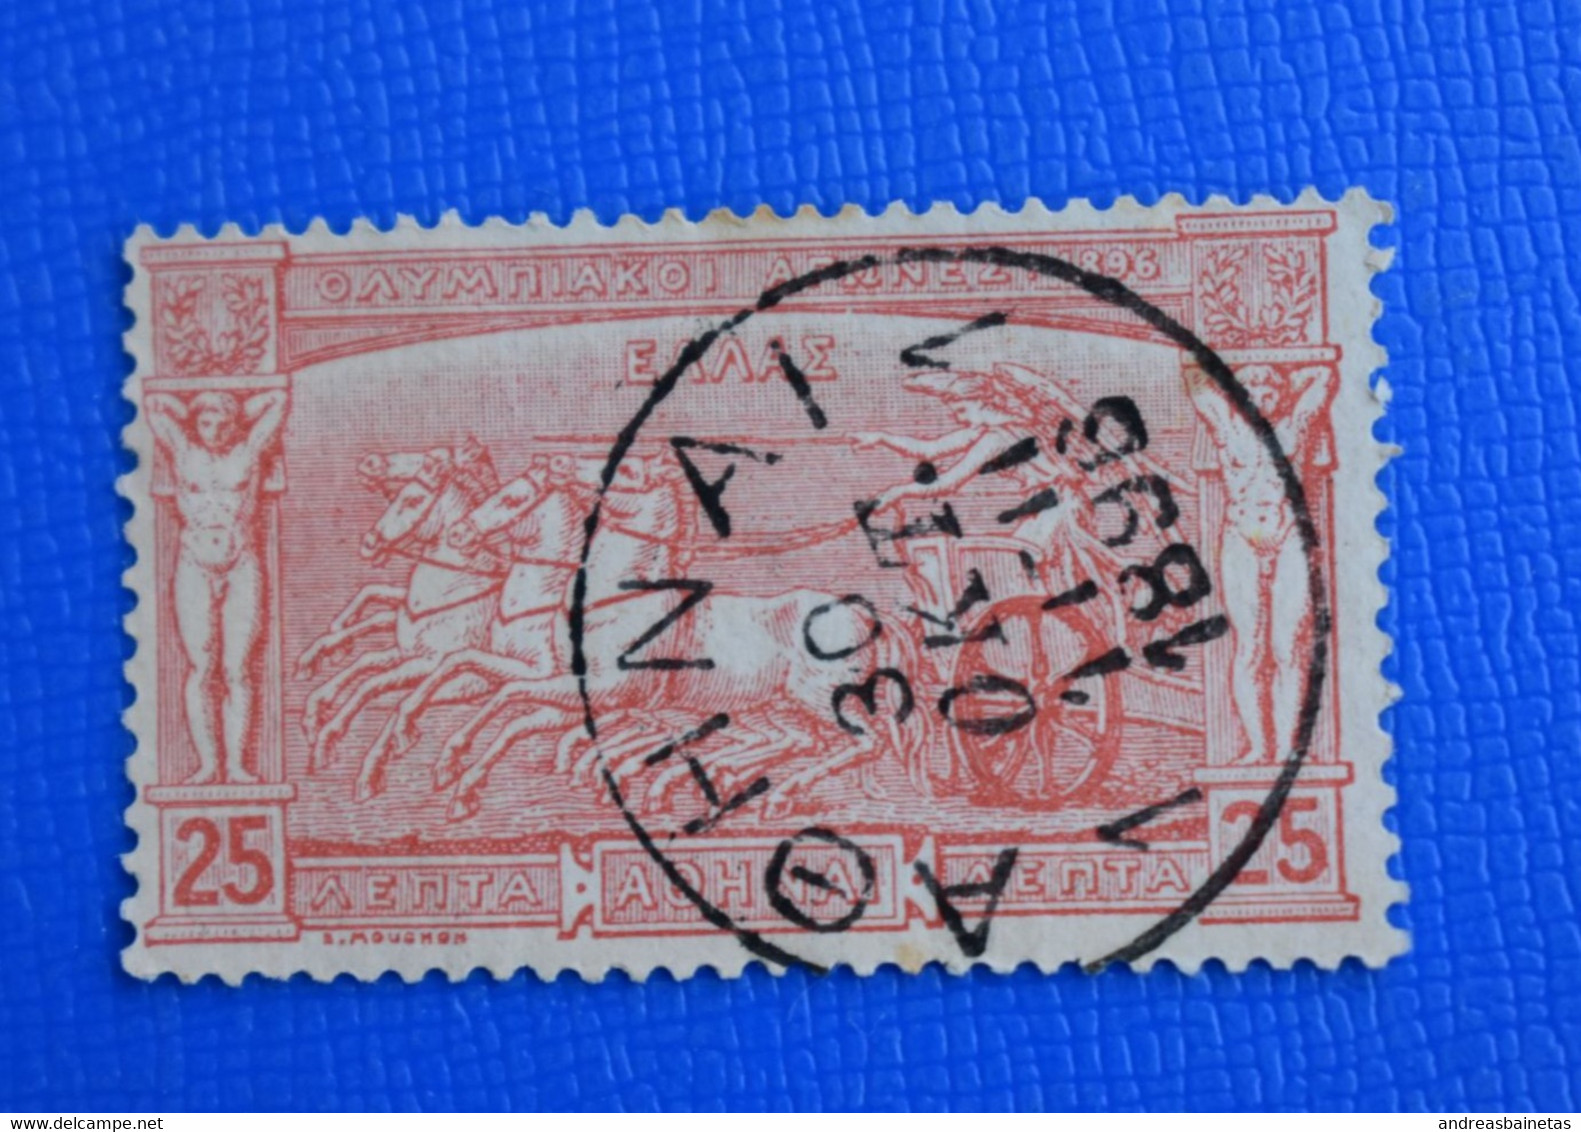 Stamps GREECE 1896 The 1st Modern Olympic Games 	25L 30/10/1896 ΑΘΗΝΑΙ Used - Used Stamps